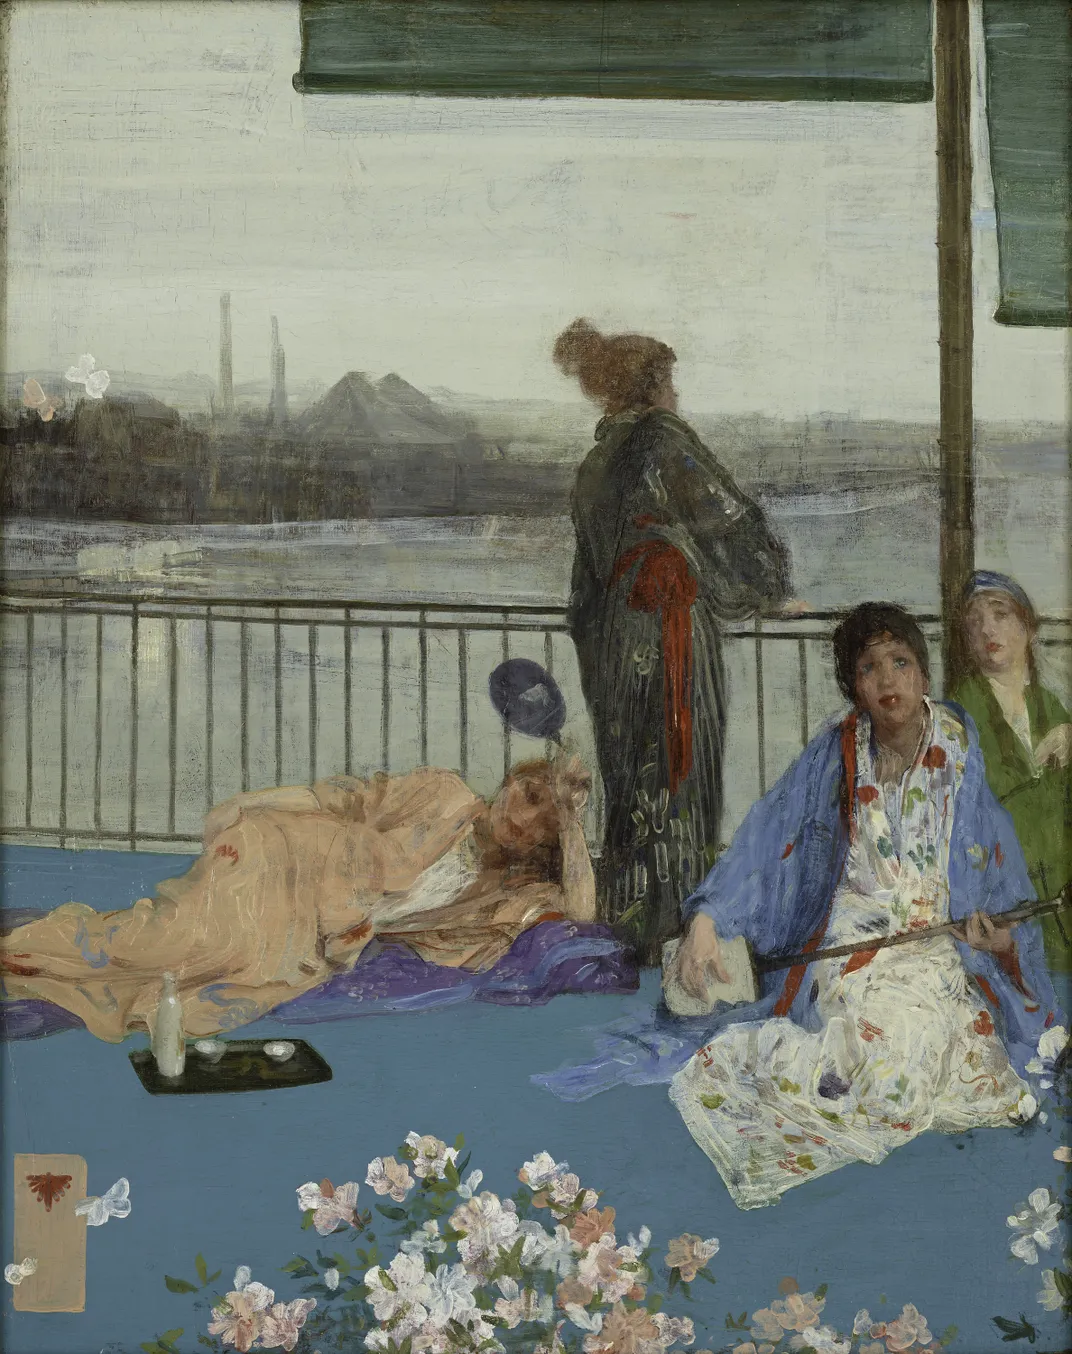 Variations in Flesh Color and Green—The Balcony, James McNeill Whistler